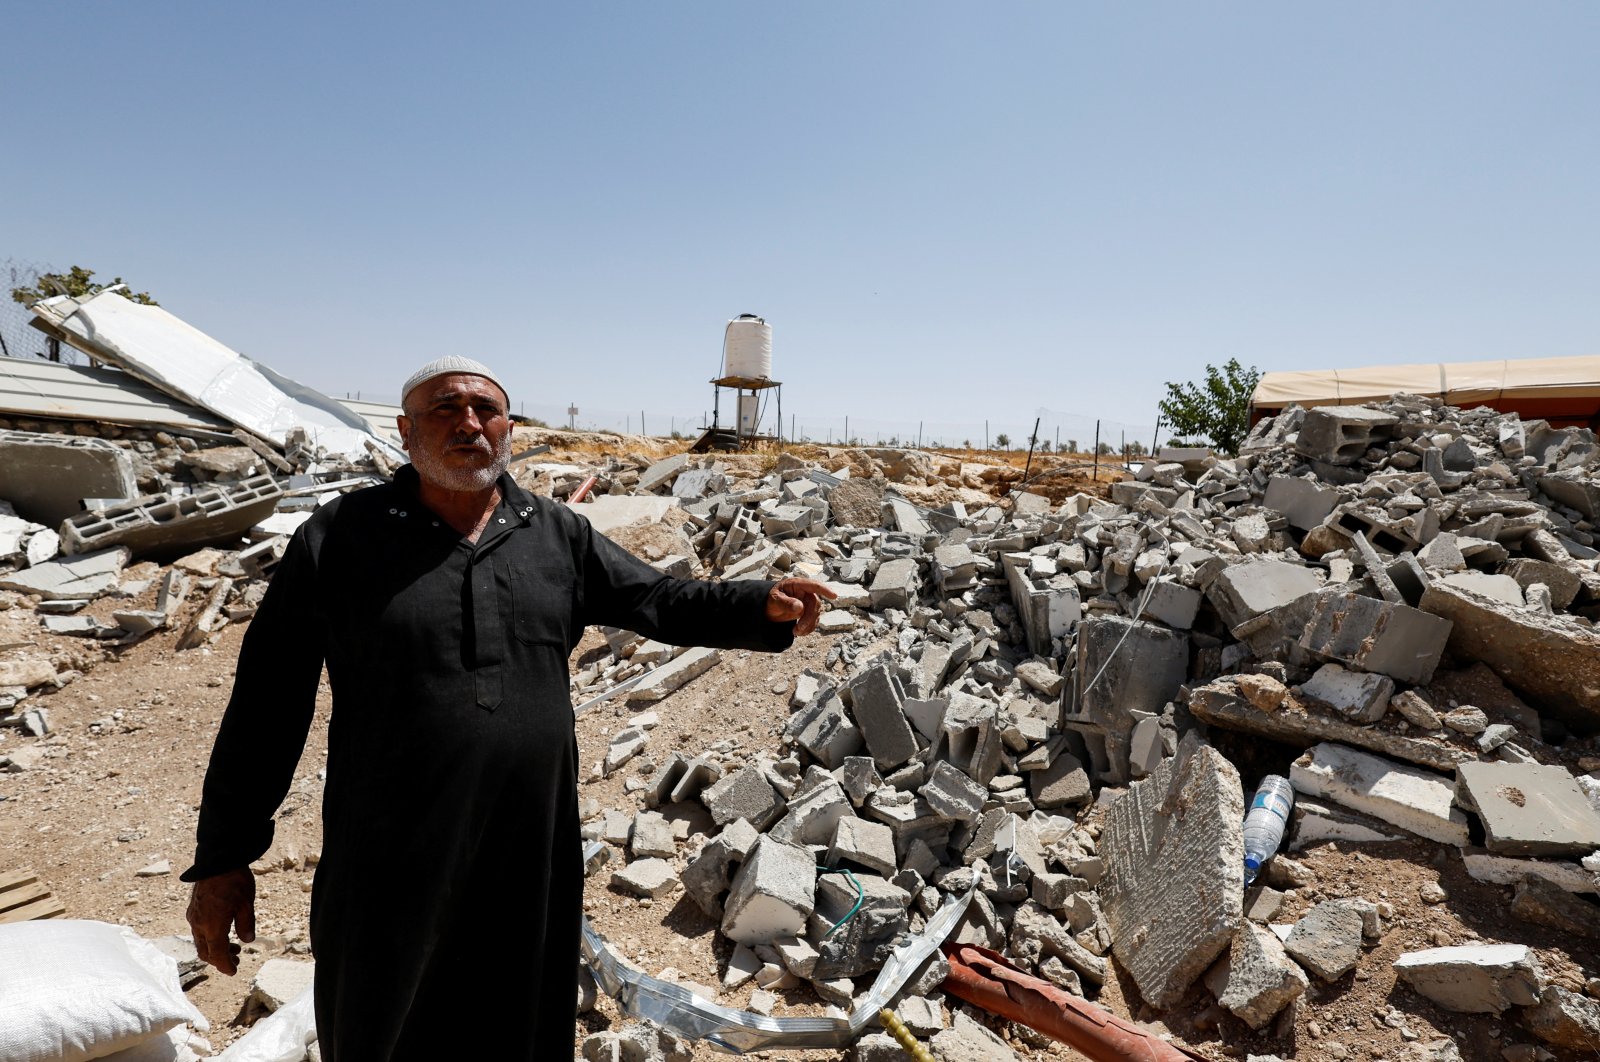 Palestinian Mahmoud Najajreh points at his demolished house, in Masafer Yatta, South of Hebron, in the Israeli-occupied West Bank, Palestine, May 31, 2022. (Reuters Photo)